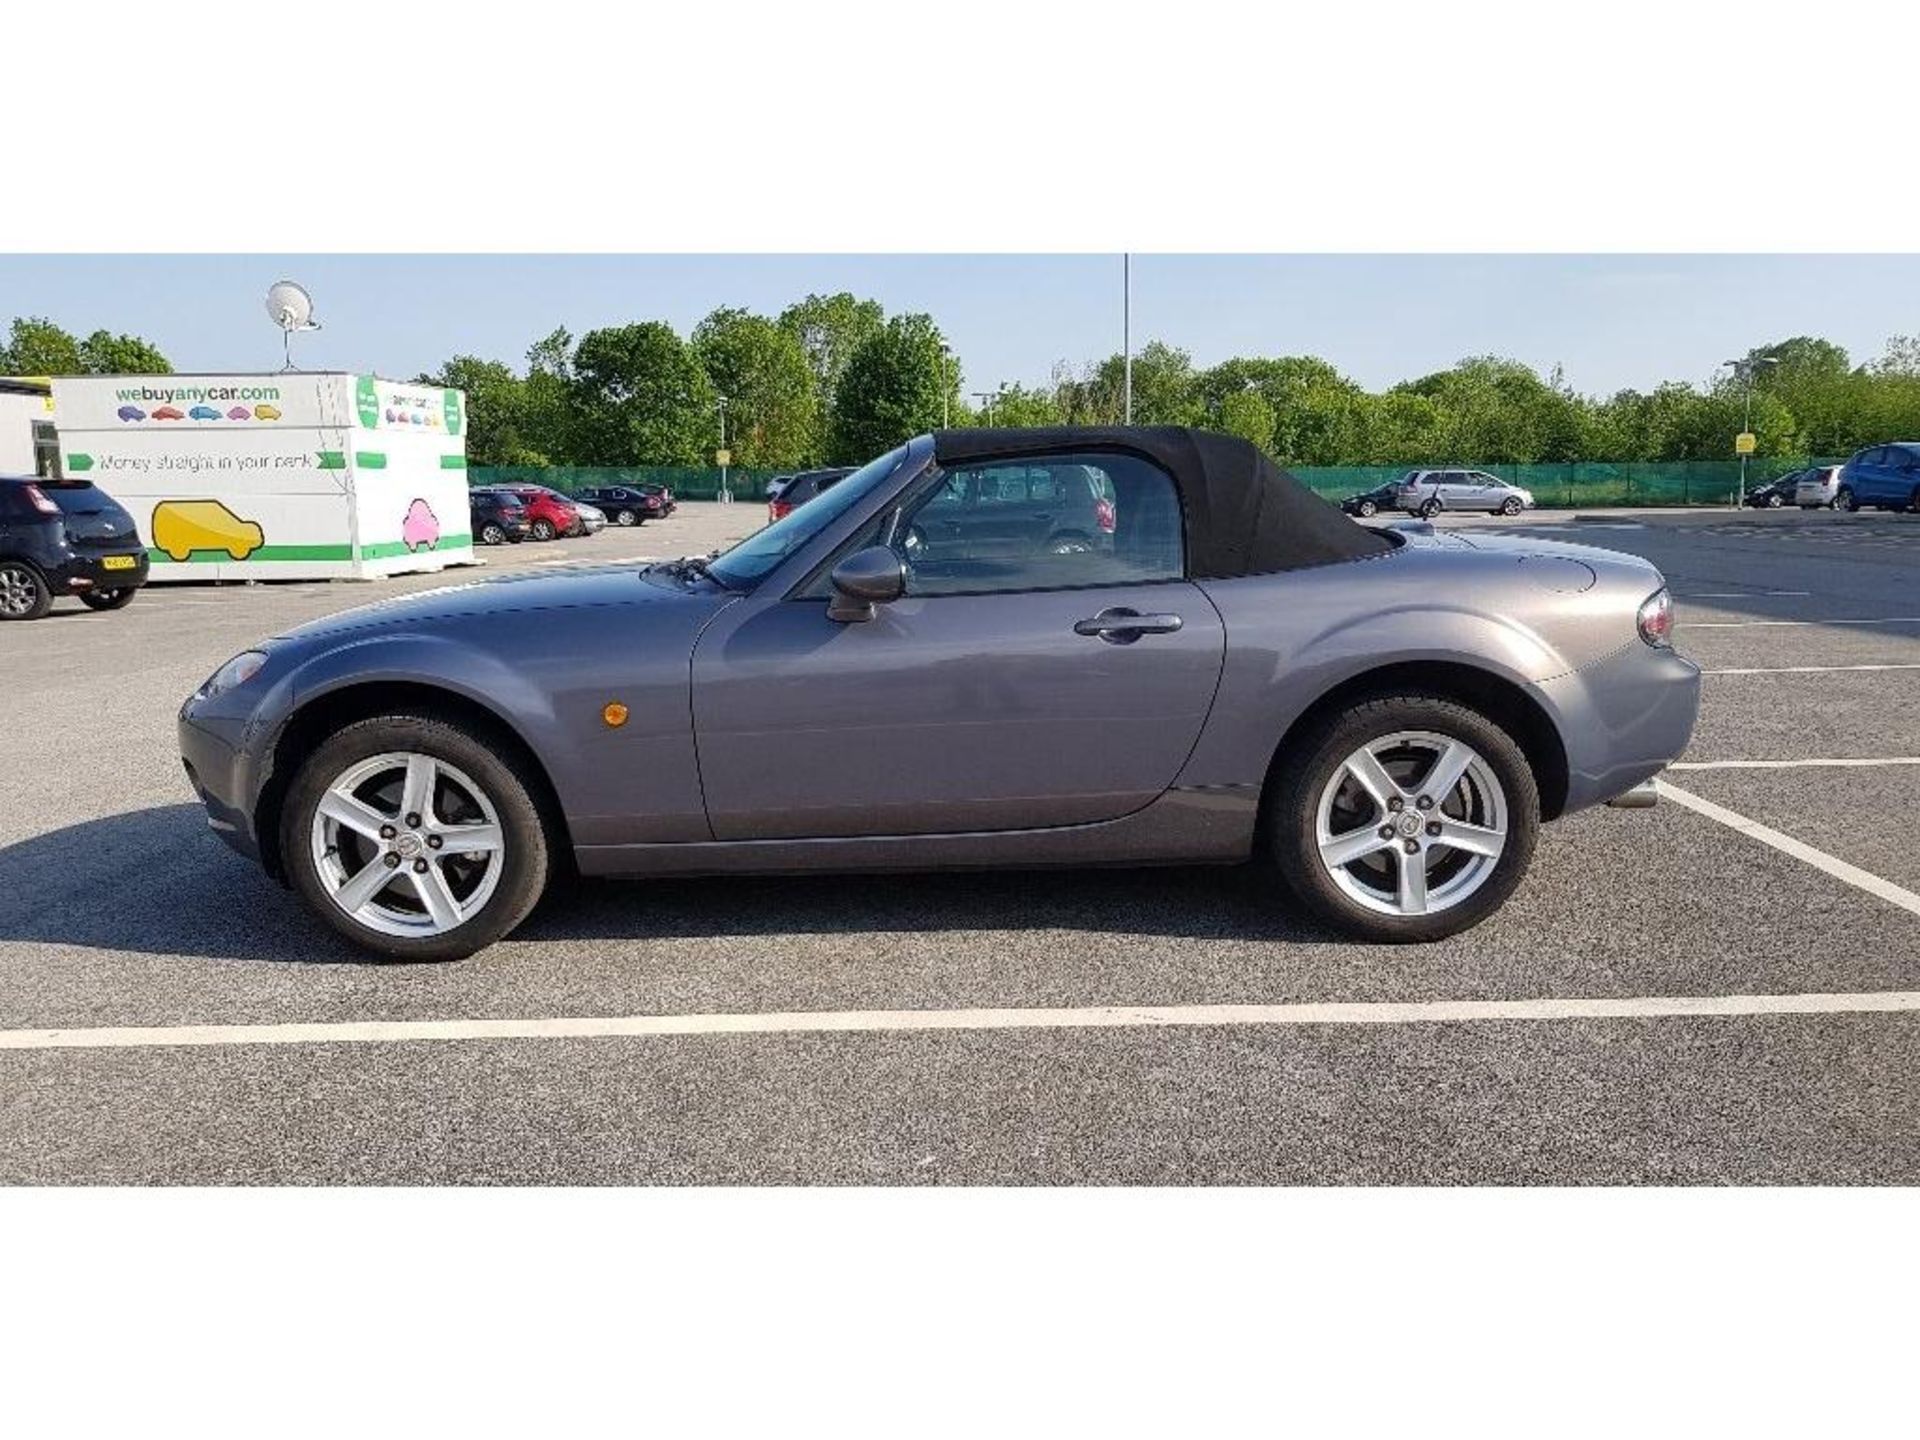 MAZDA, MX-5 CONVERTIBLE, FLO6 HCU, FIRST DATE OF REGISTRATION 31/03/18, 1.8 LITRE, PETROL, MANUAL, 2 - Image 2 of 9